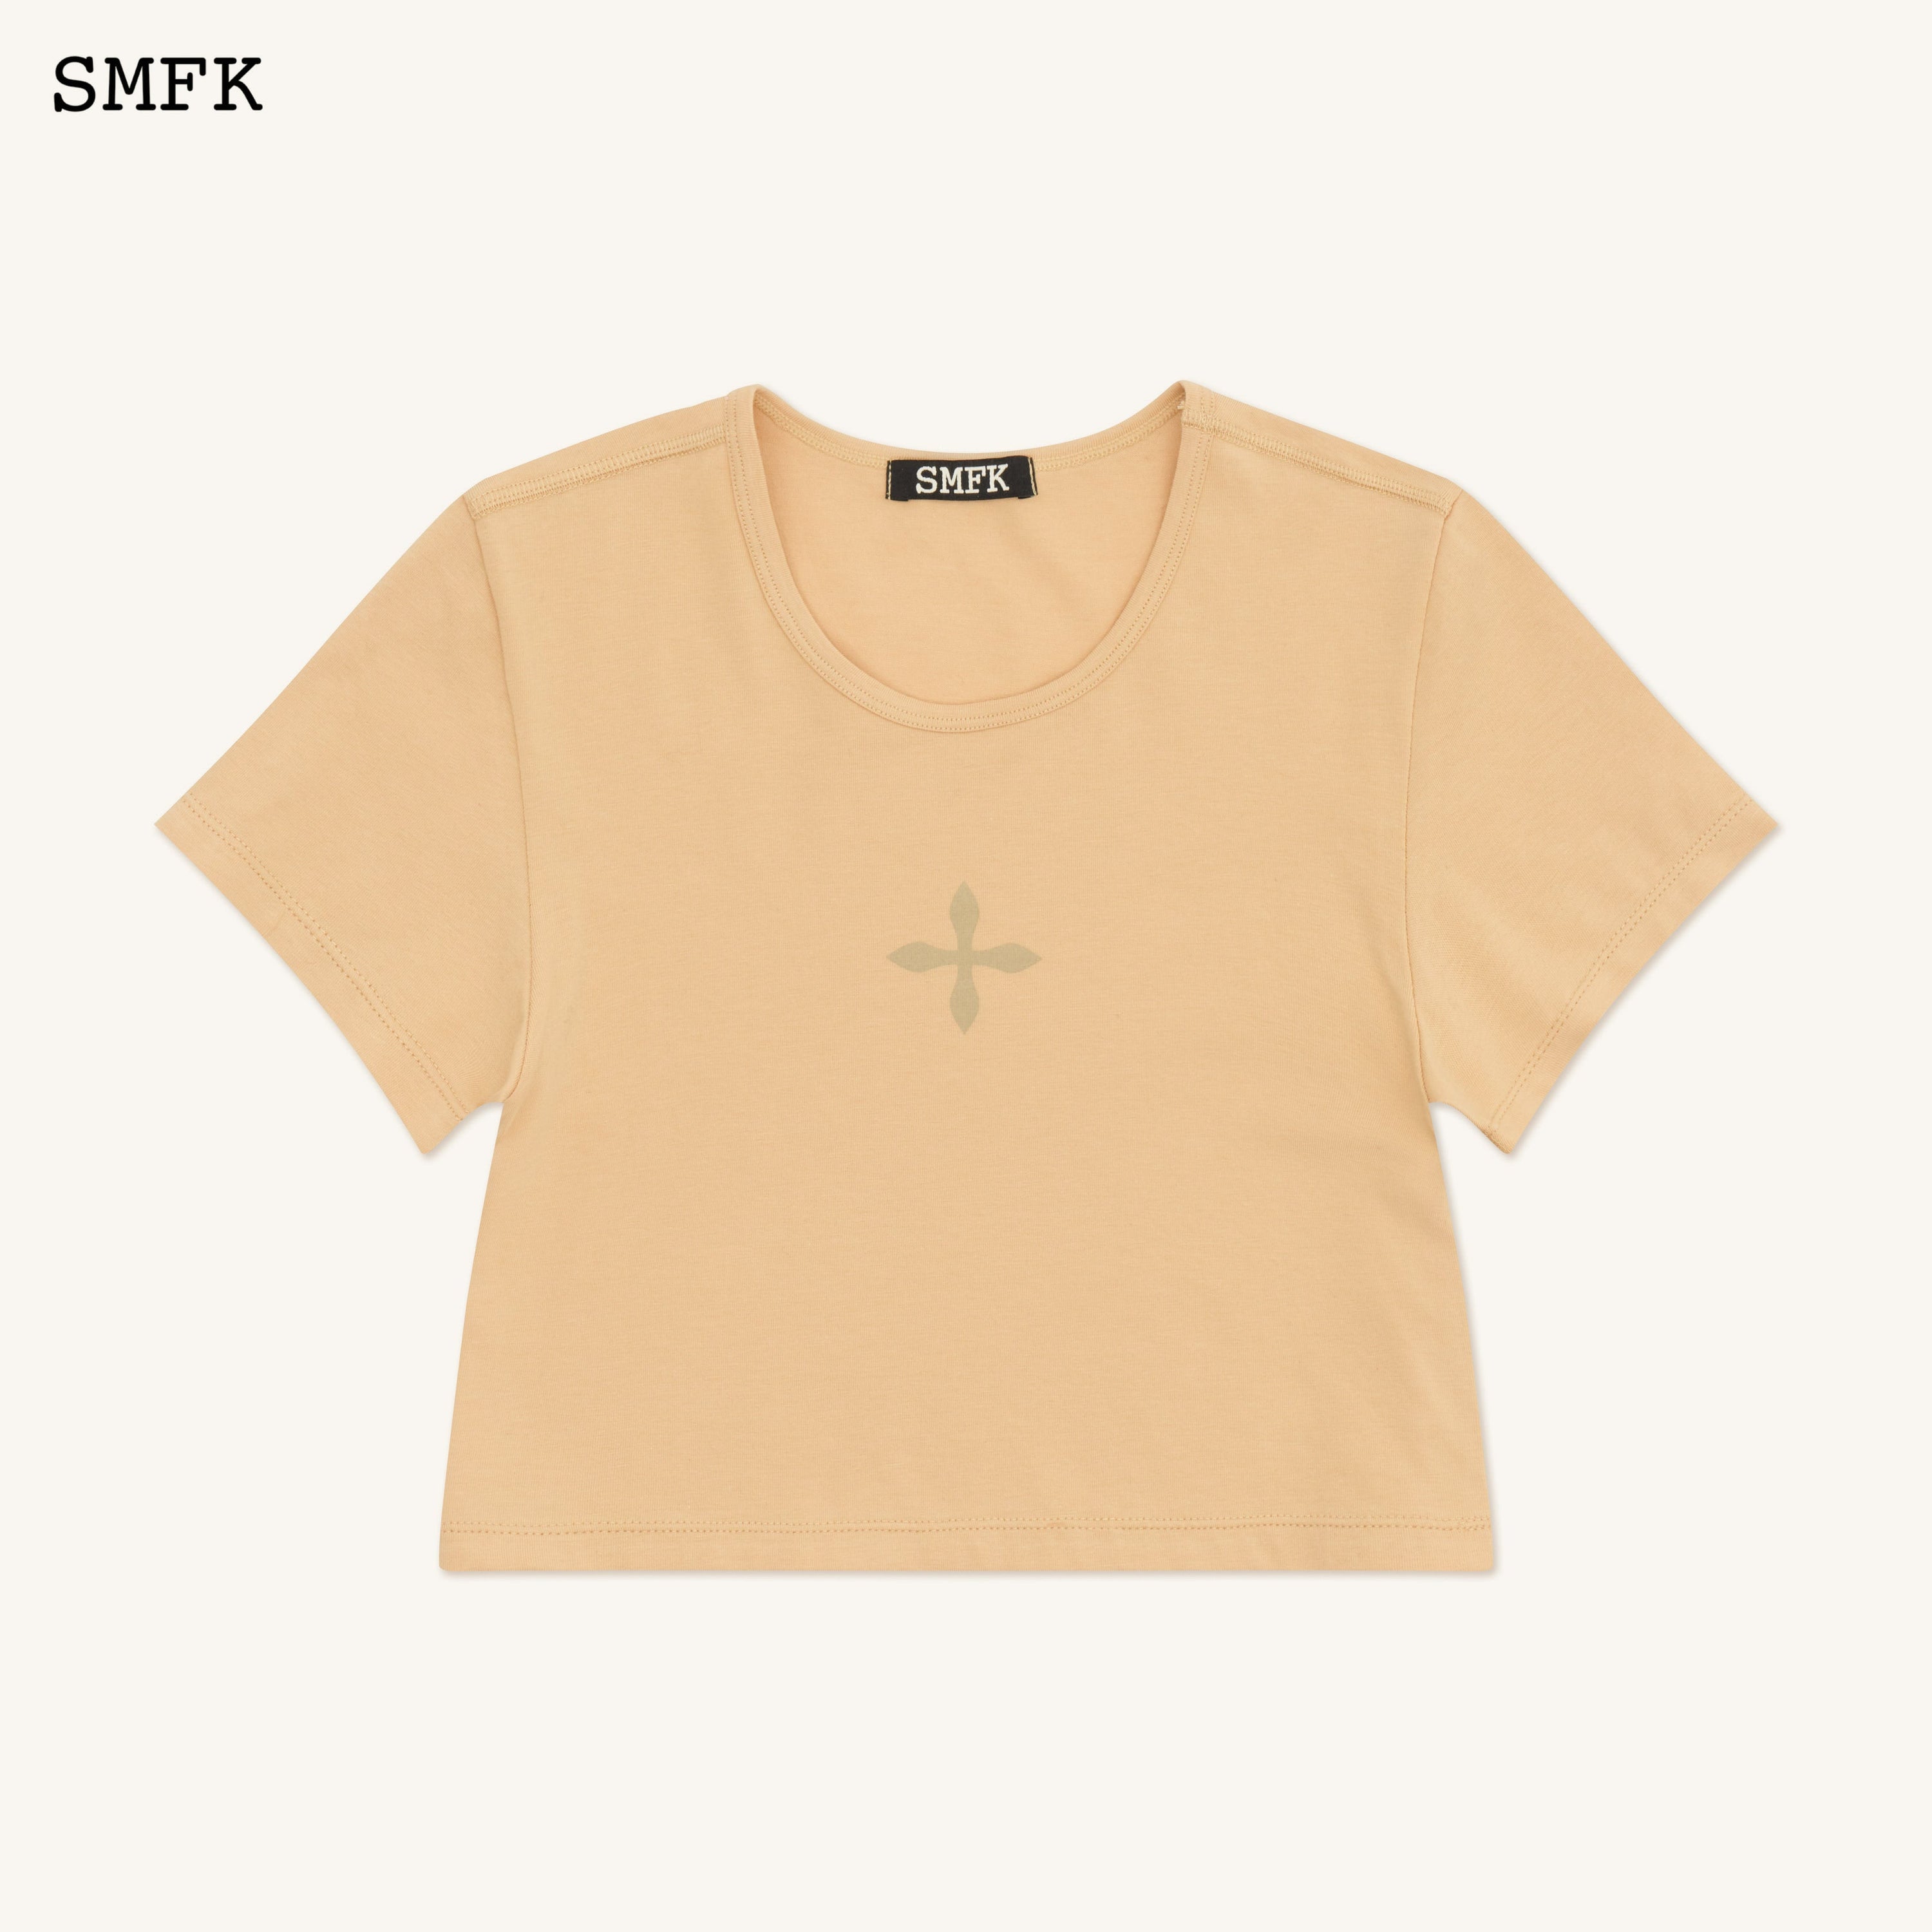 Compass Cross Classic Sporty Tights Tee In Sand - SMFK Official